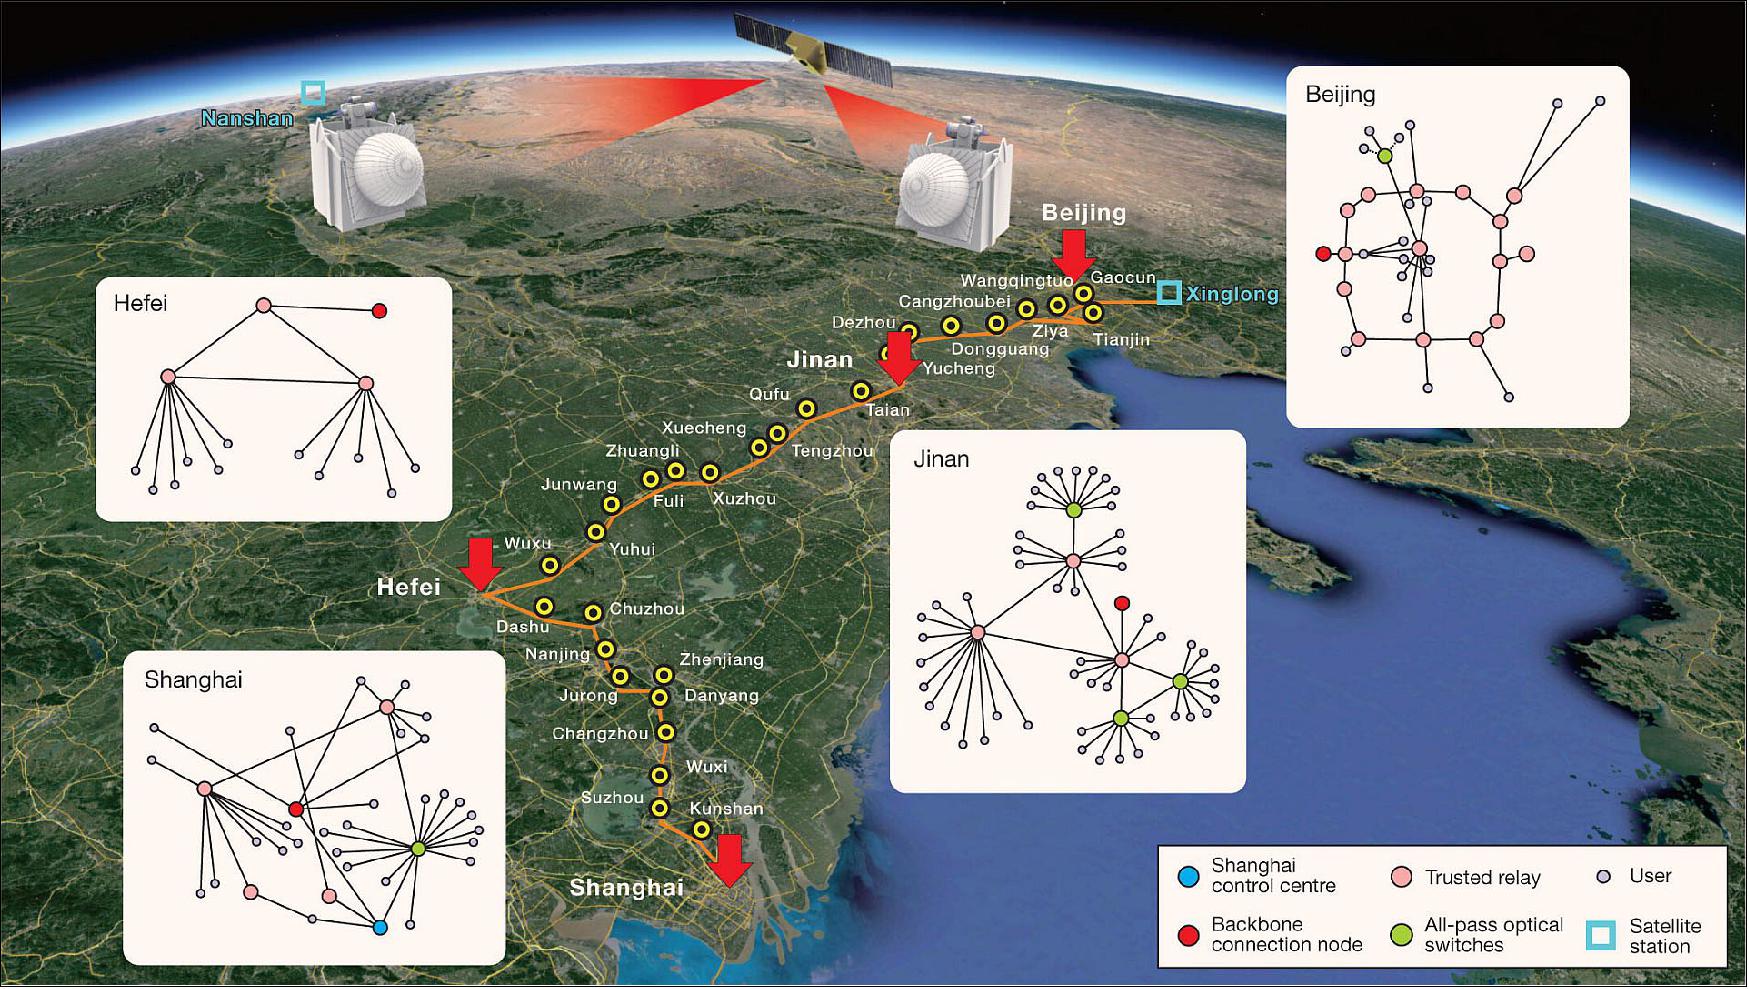 Figure 4: Chinese scientists have established the world's first integrated quantum communication network, combining over 700 optical fibers on the ground with two ground-to-satellite links to achieve quantum key distribution over a total distance of 4,600 kilometers for users across the country (image credit: University of Science and Technology of China)